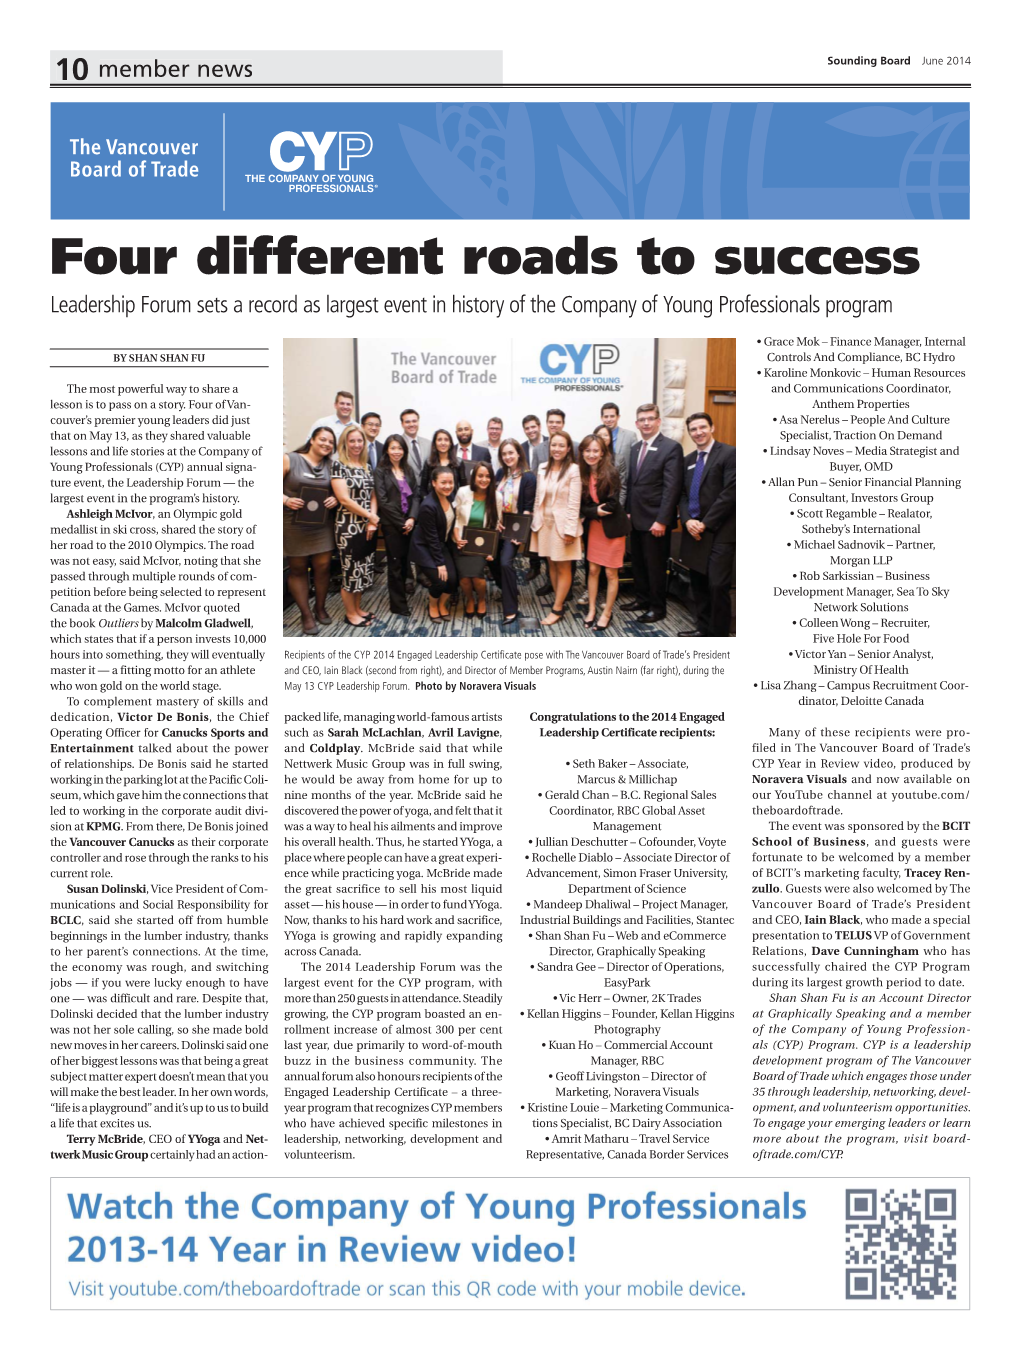 Four Different Roads to Success Leadership Forum Sets a Record As Largest Event in History of the Company of Young Professionals Program